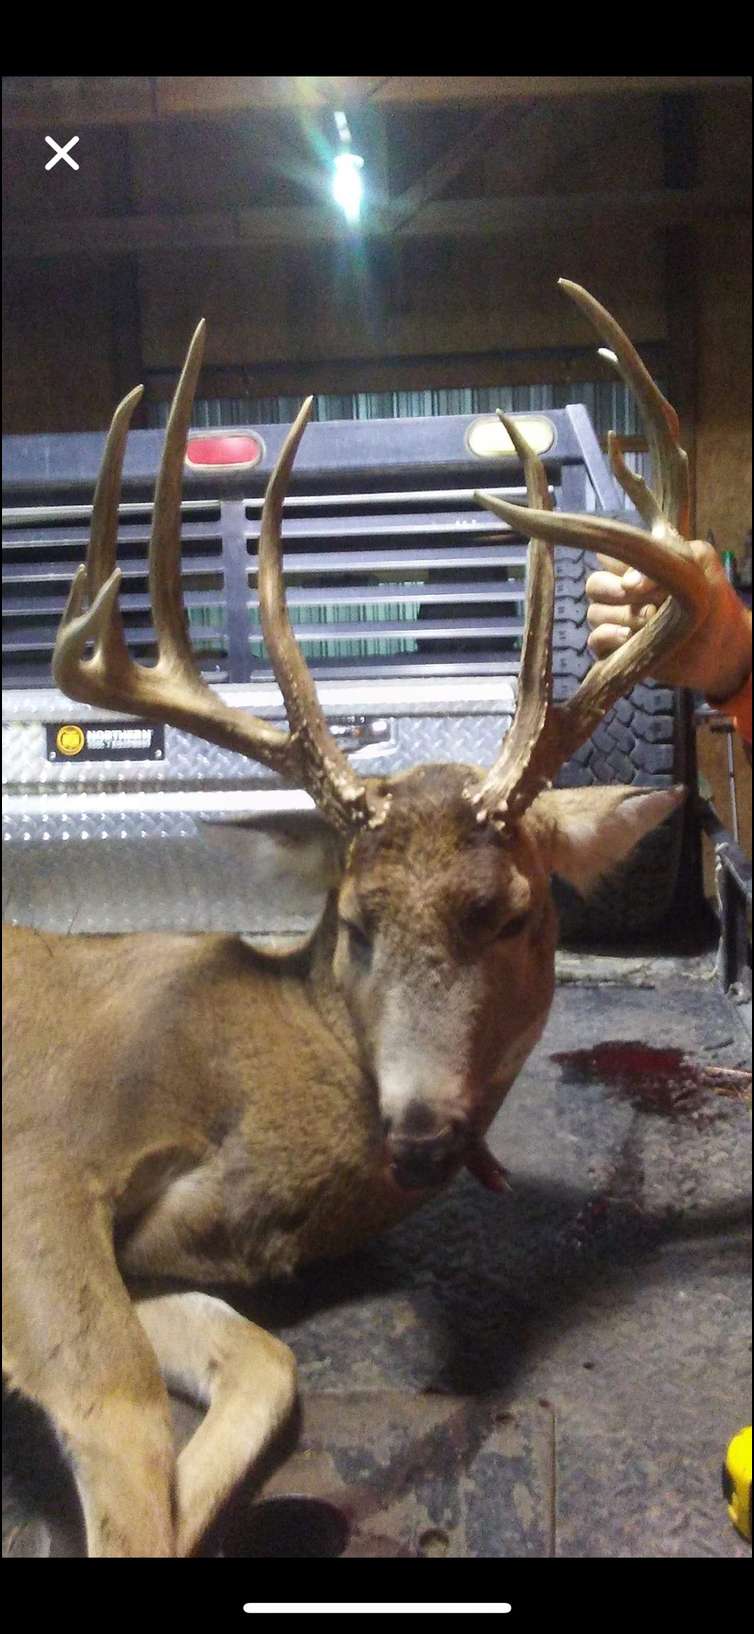 Mr. Whitetail's embedded Photo